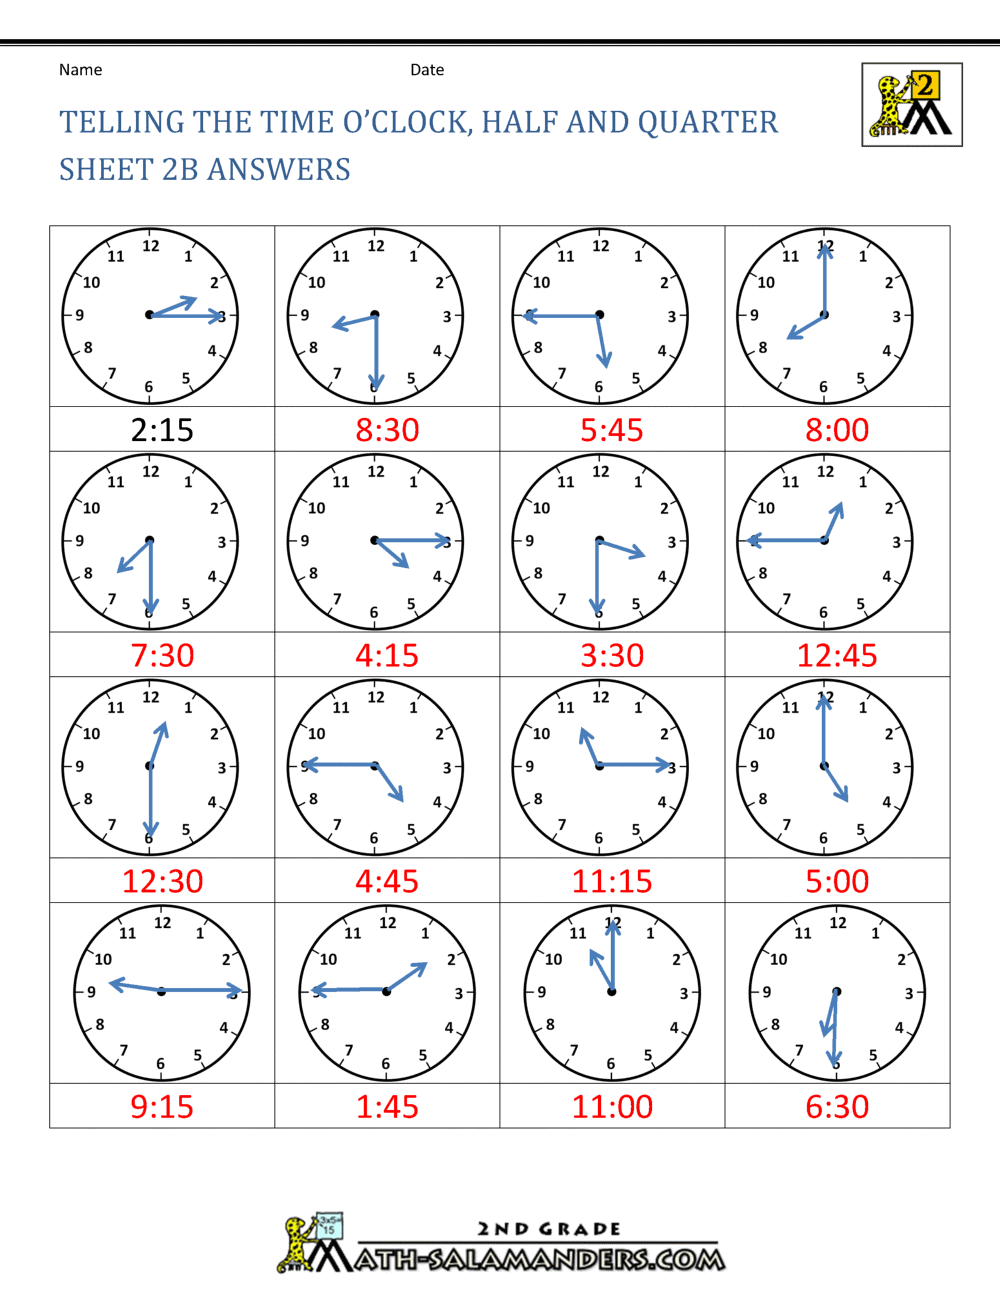 How To Tell Time On A Clock - All You Need Infos